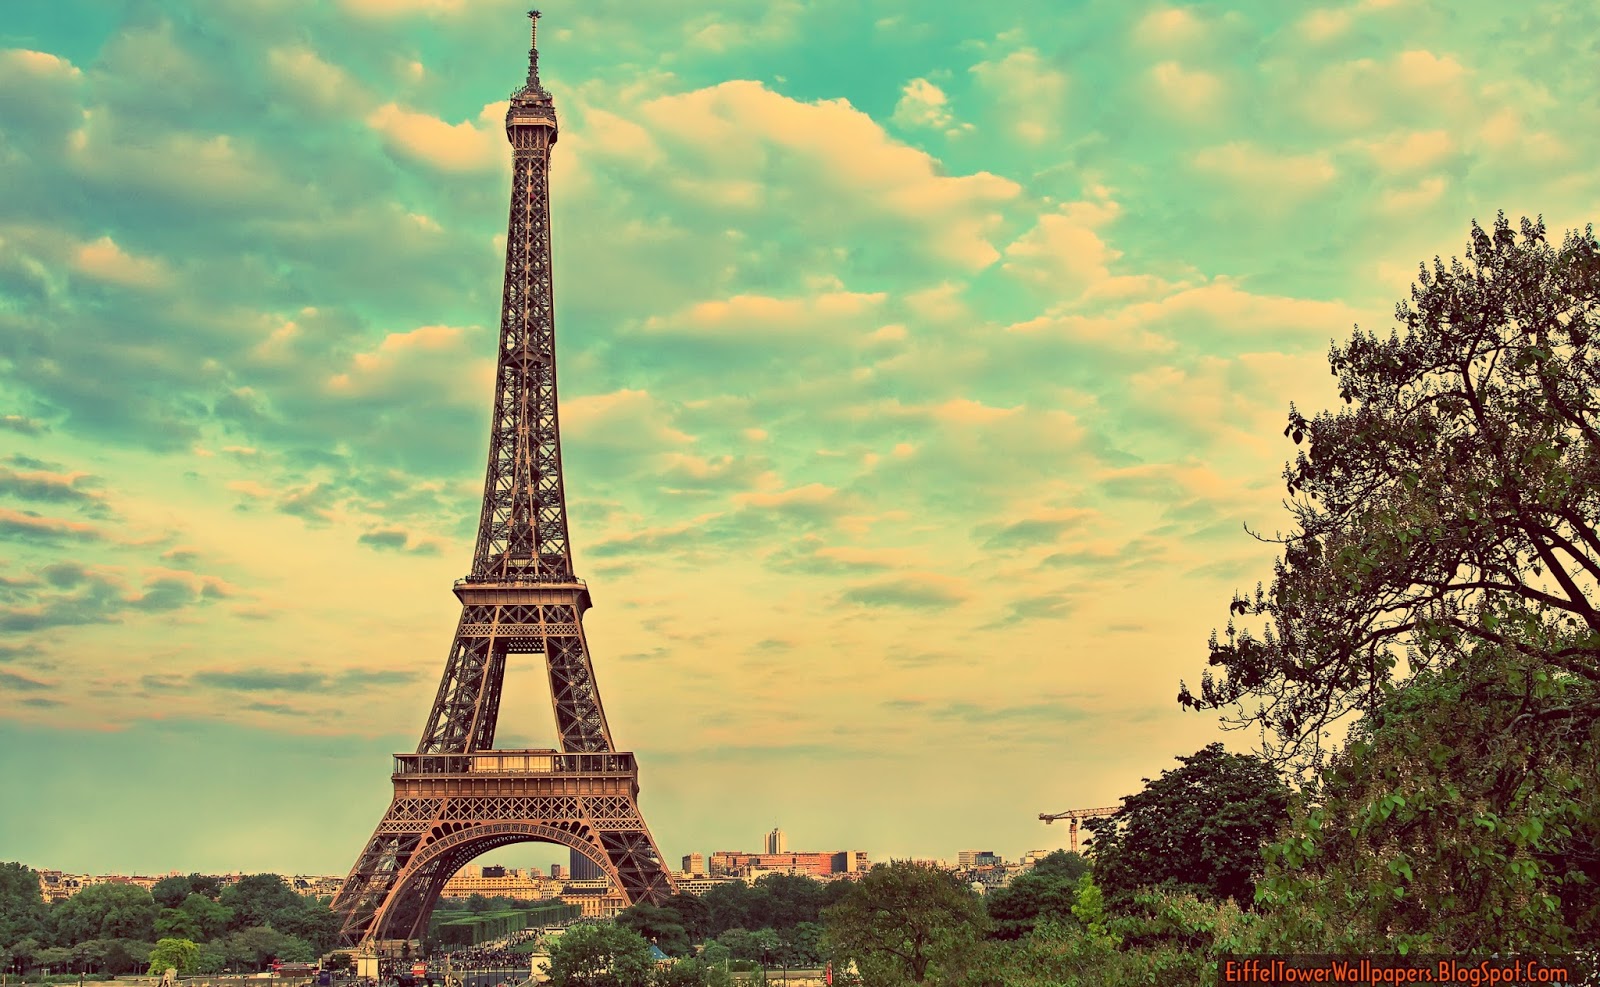 Eiffel Tower Hd Wallpapers Collection 2016-2017 | Eiffel Tower Latest